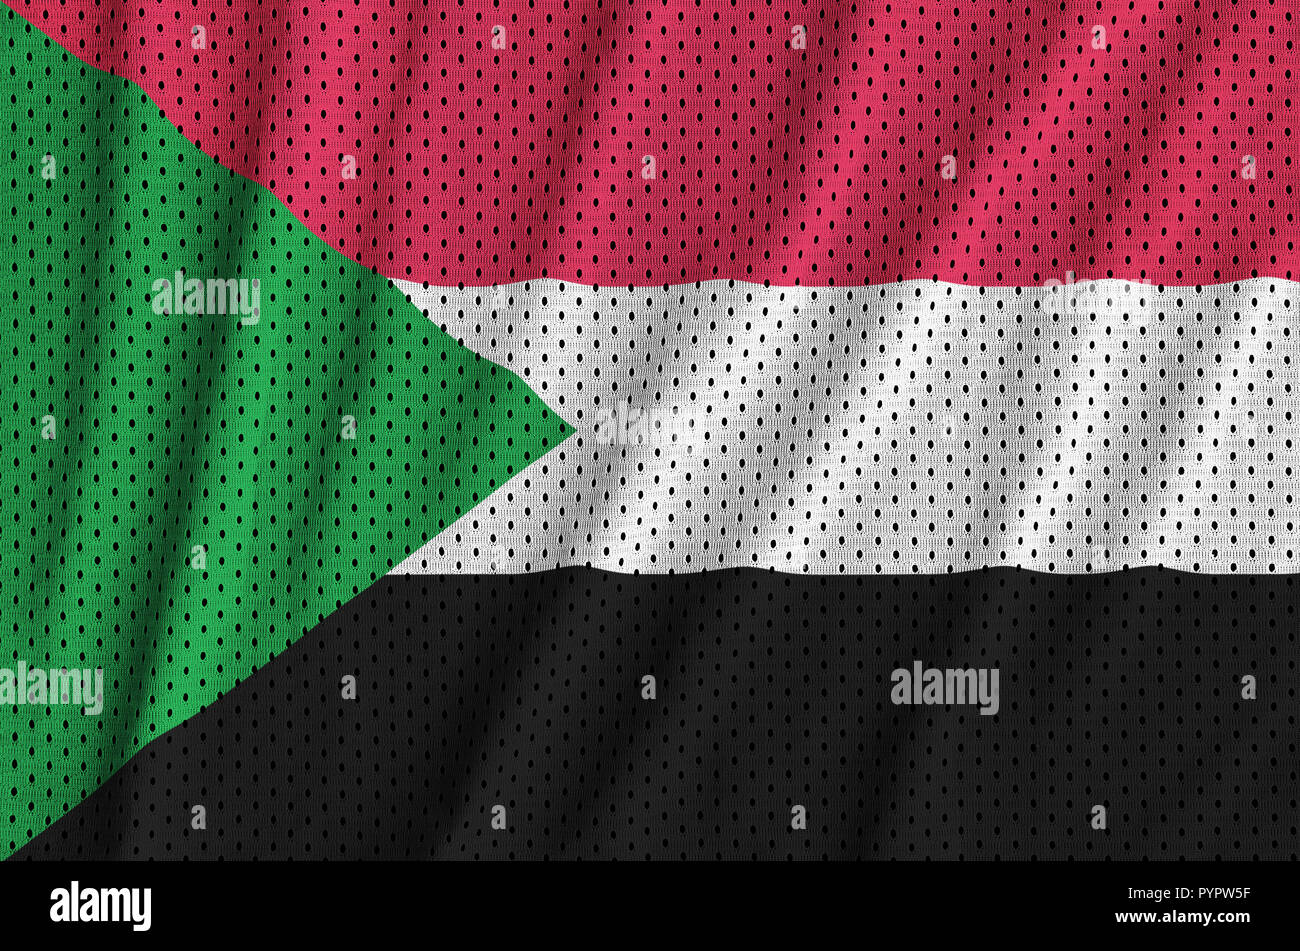 Sudan flag printed on a polyester nylon sportswear mesh fabric with some folds Stock Photo